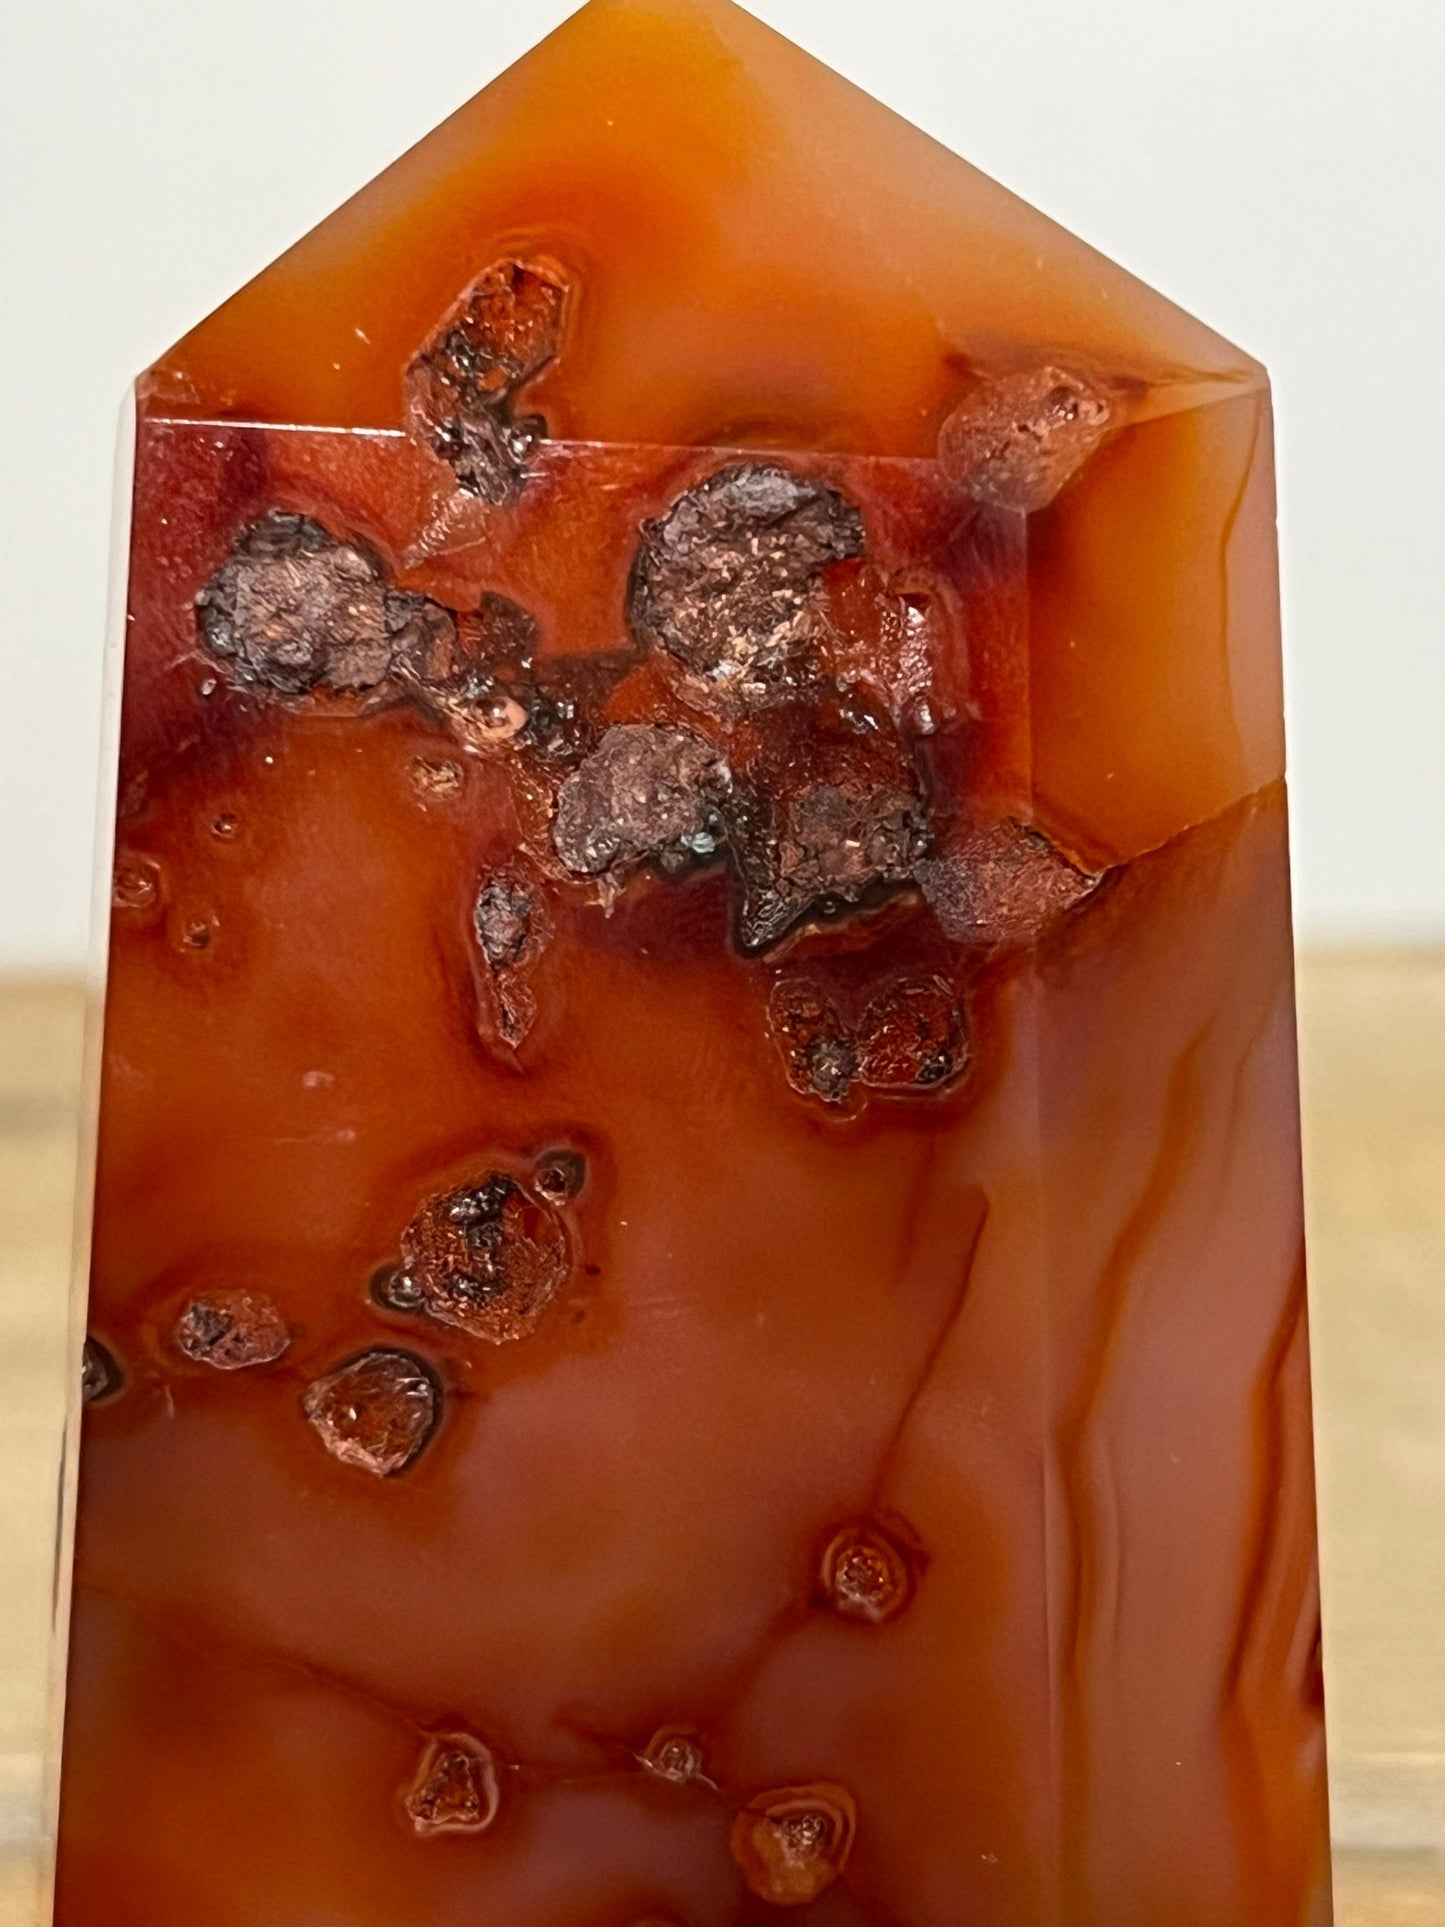 Carnelian Tower | Chunky Red Banded Carnelian Agate Tower 4.08” Tall